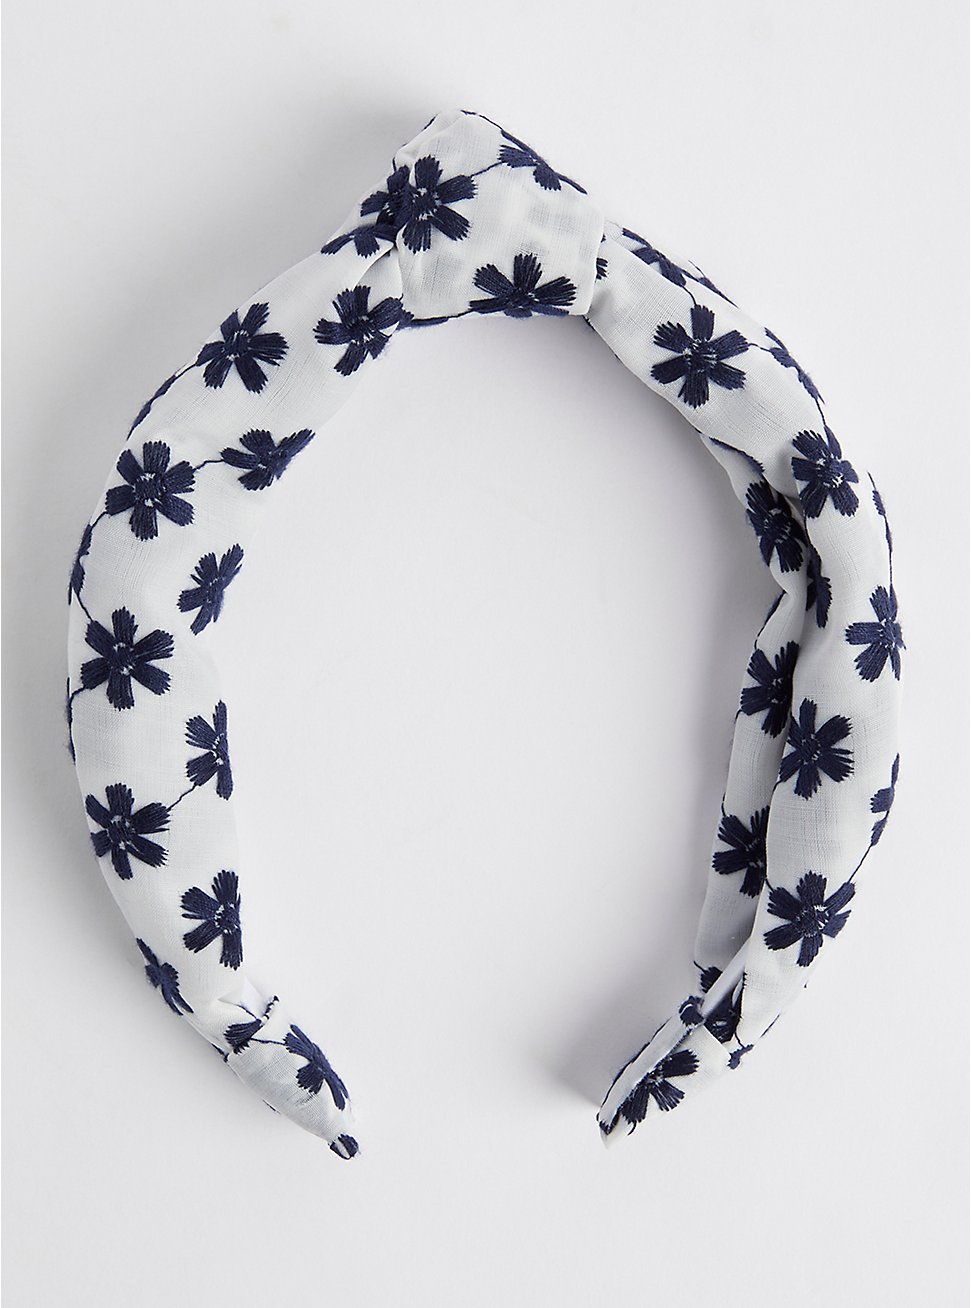 Plus Size Headband - Floral Knot Navy & White, , hi-res